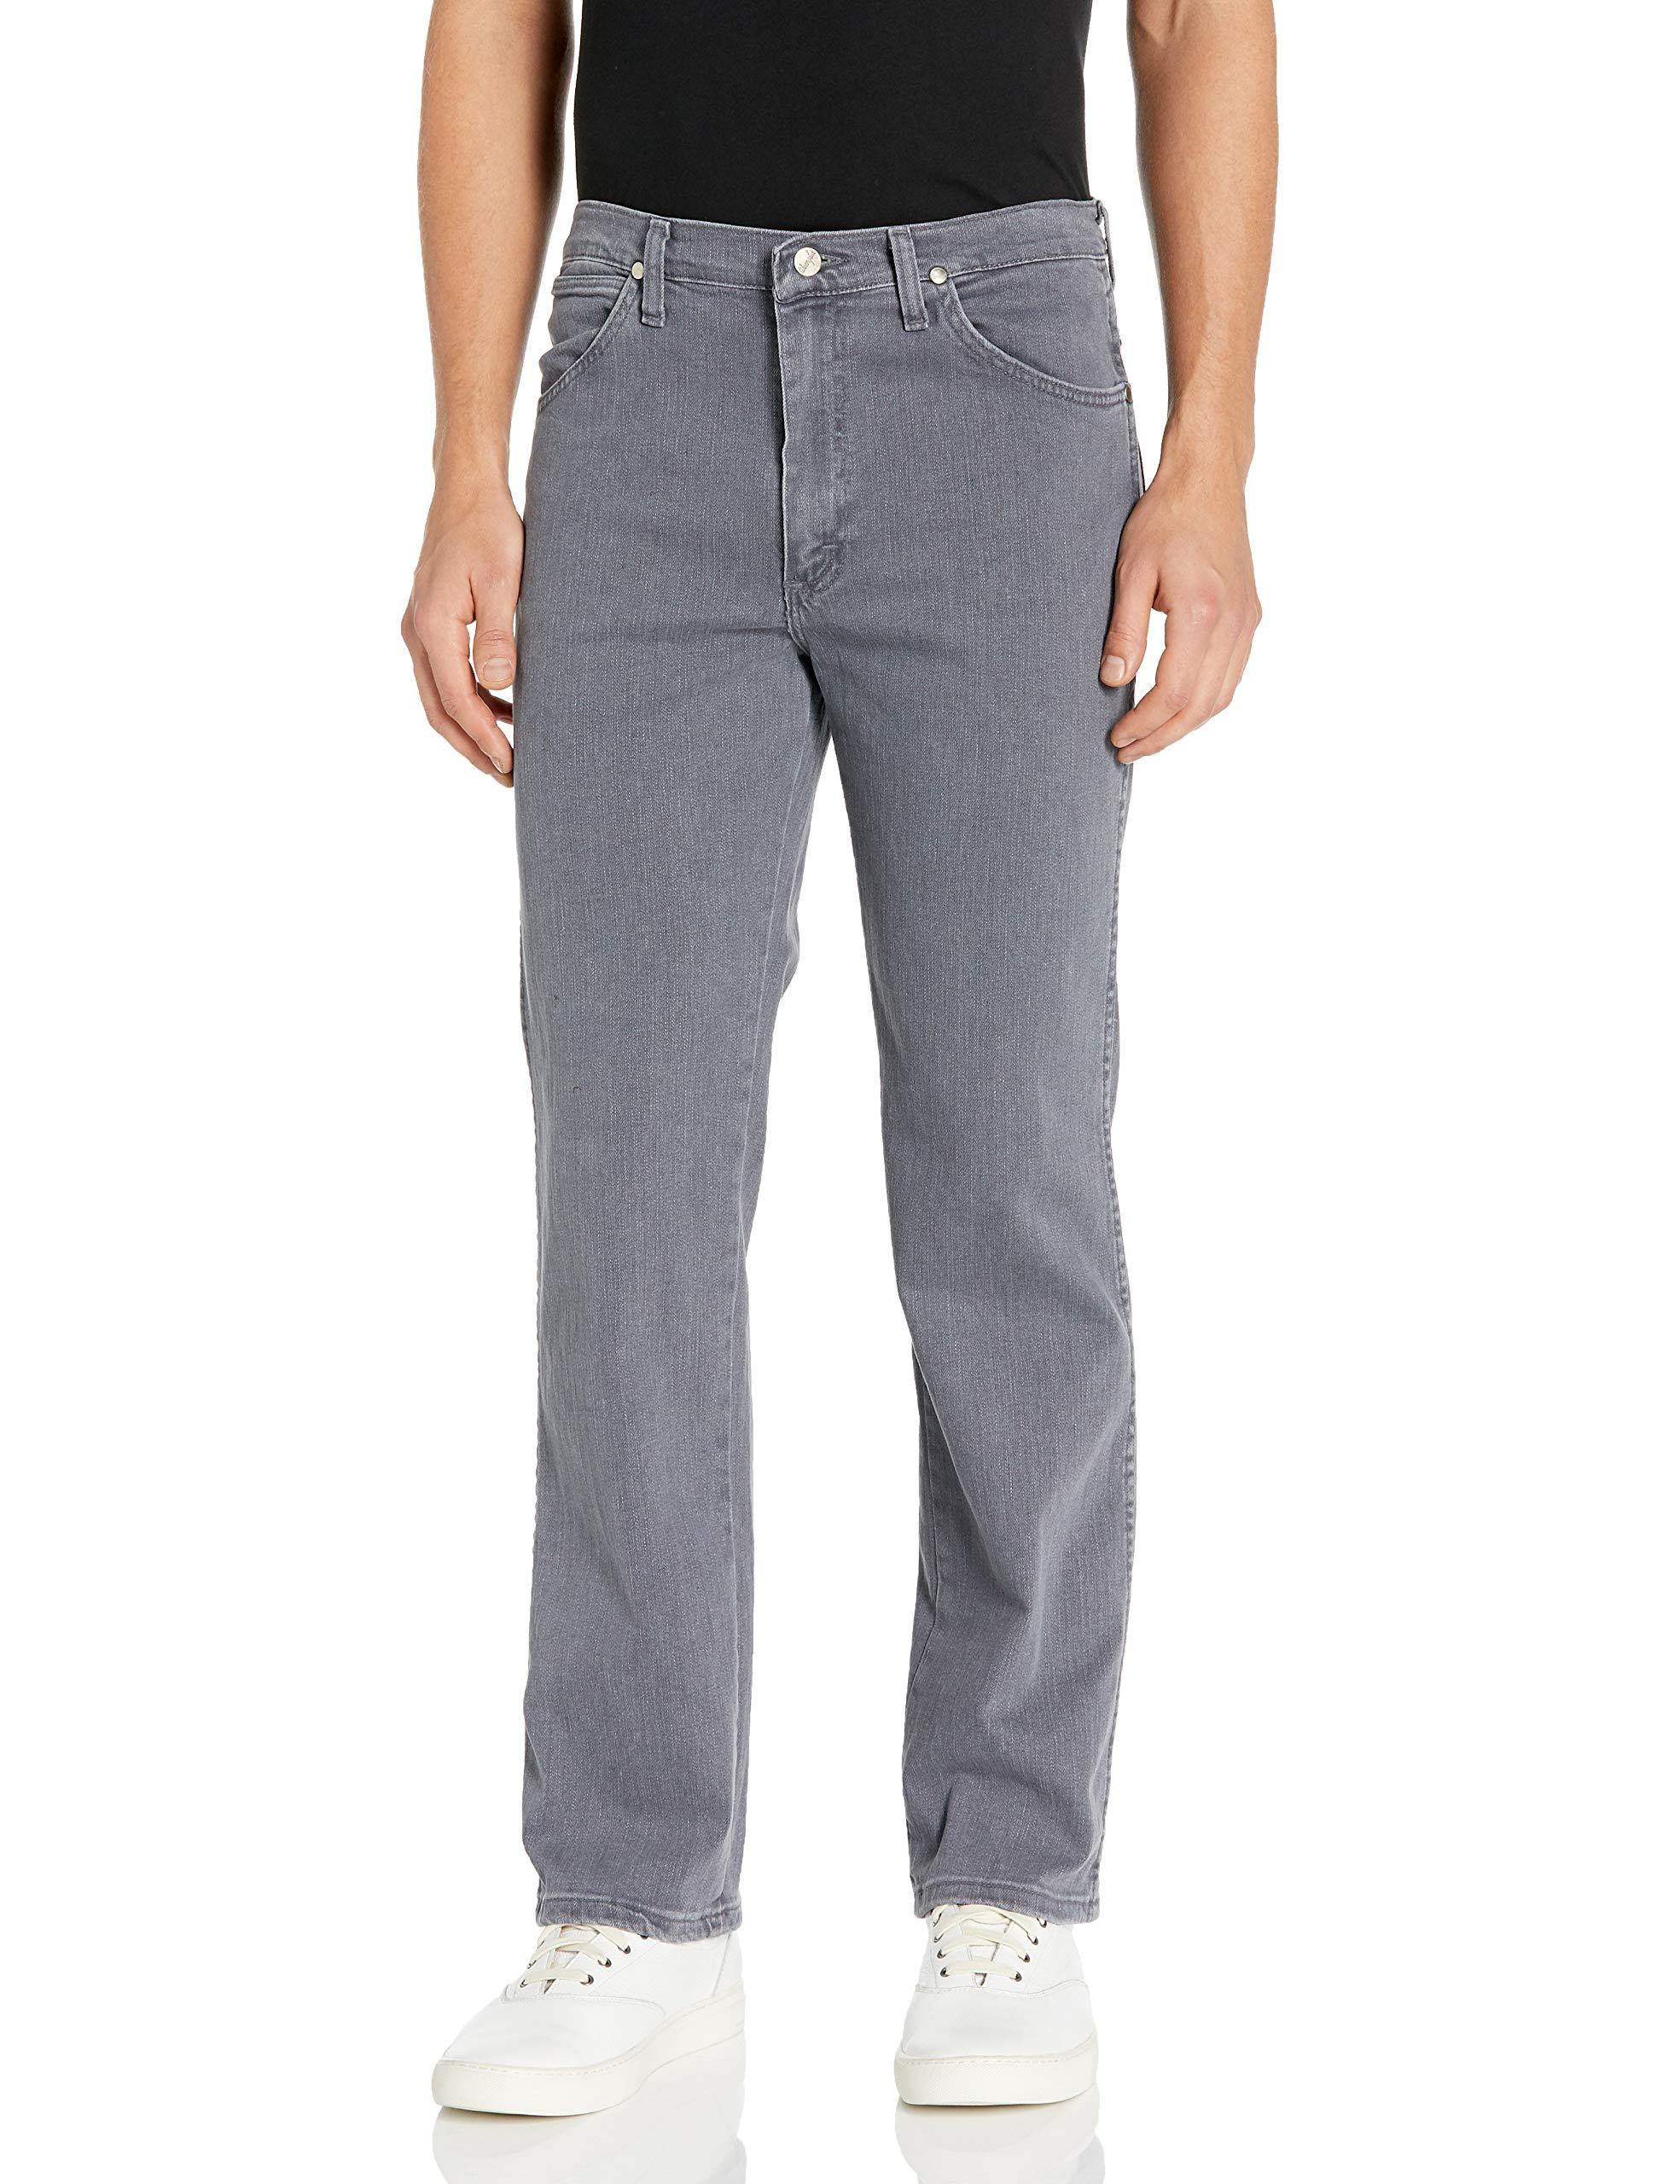 Wrangler Mens Silver Edition Grey Jeans in Gray for Men - Save 40% - Lyst